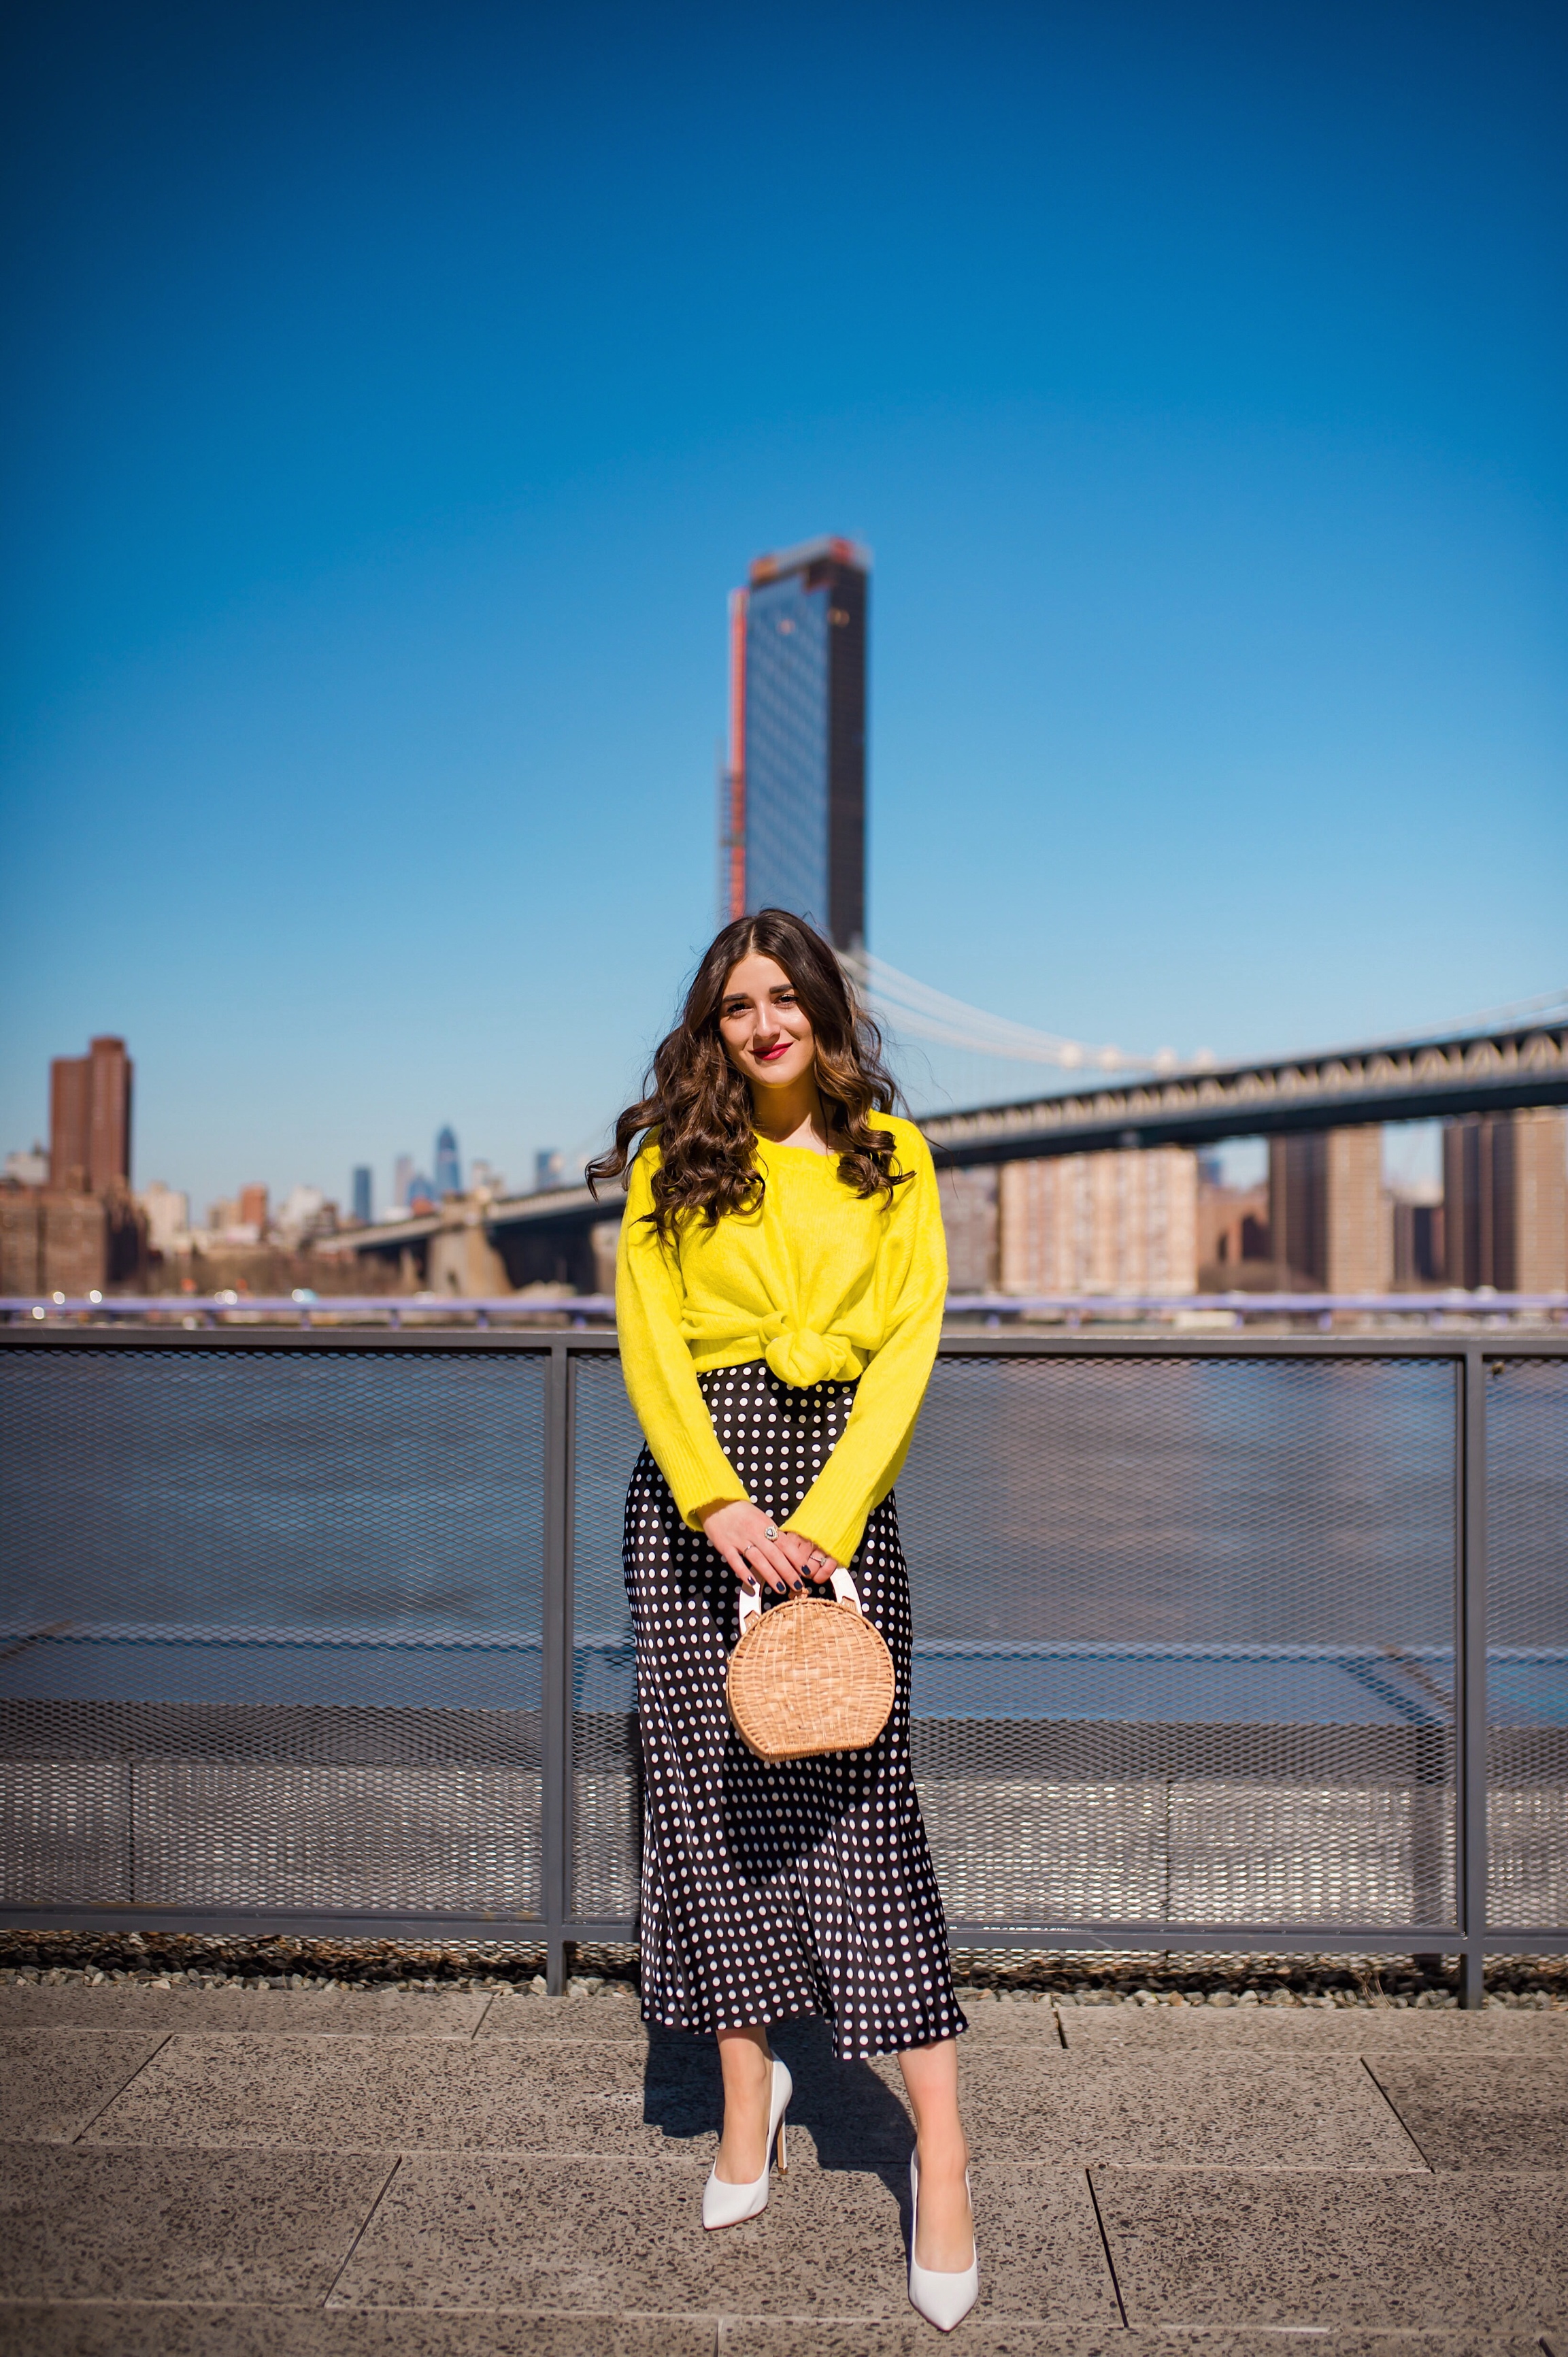 How I Wound Up With Boring White Dishes Navy Polka Dot Dress Neon Yellow Knotted Sweater Esther Santer Fashion Blog NYC Street Style Blogger Outfit OOTD Trendy Shopping Girl White Heels What How To Wear Brooklyn Bridge Laurel Creative Photoshoot Dumbo.JPG